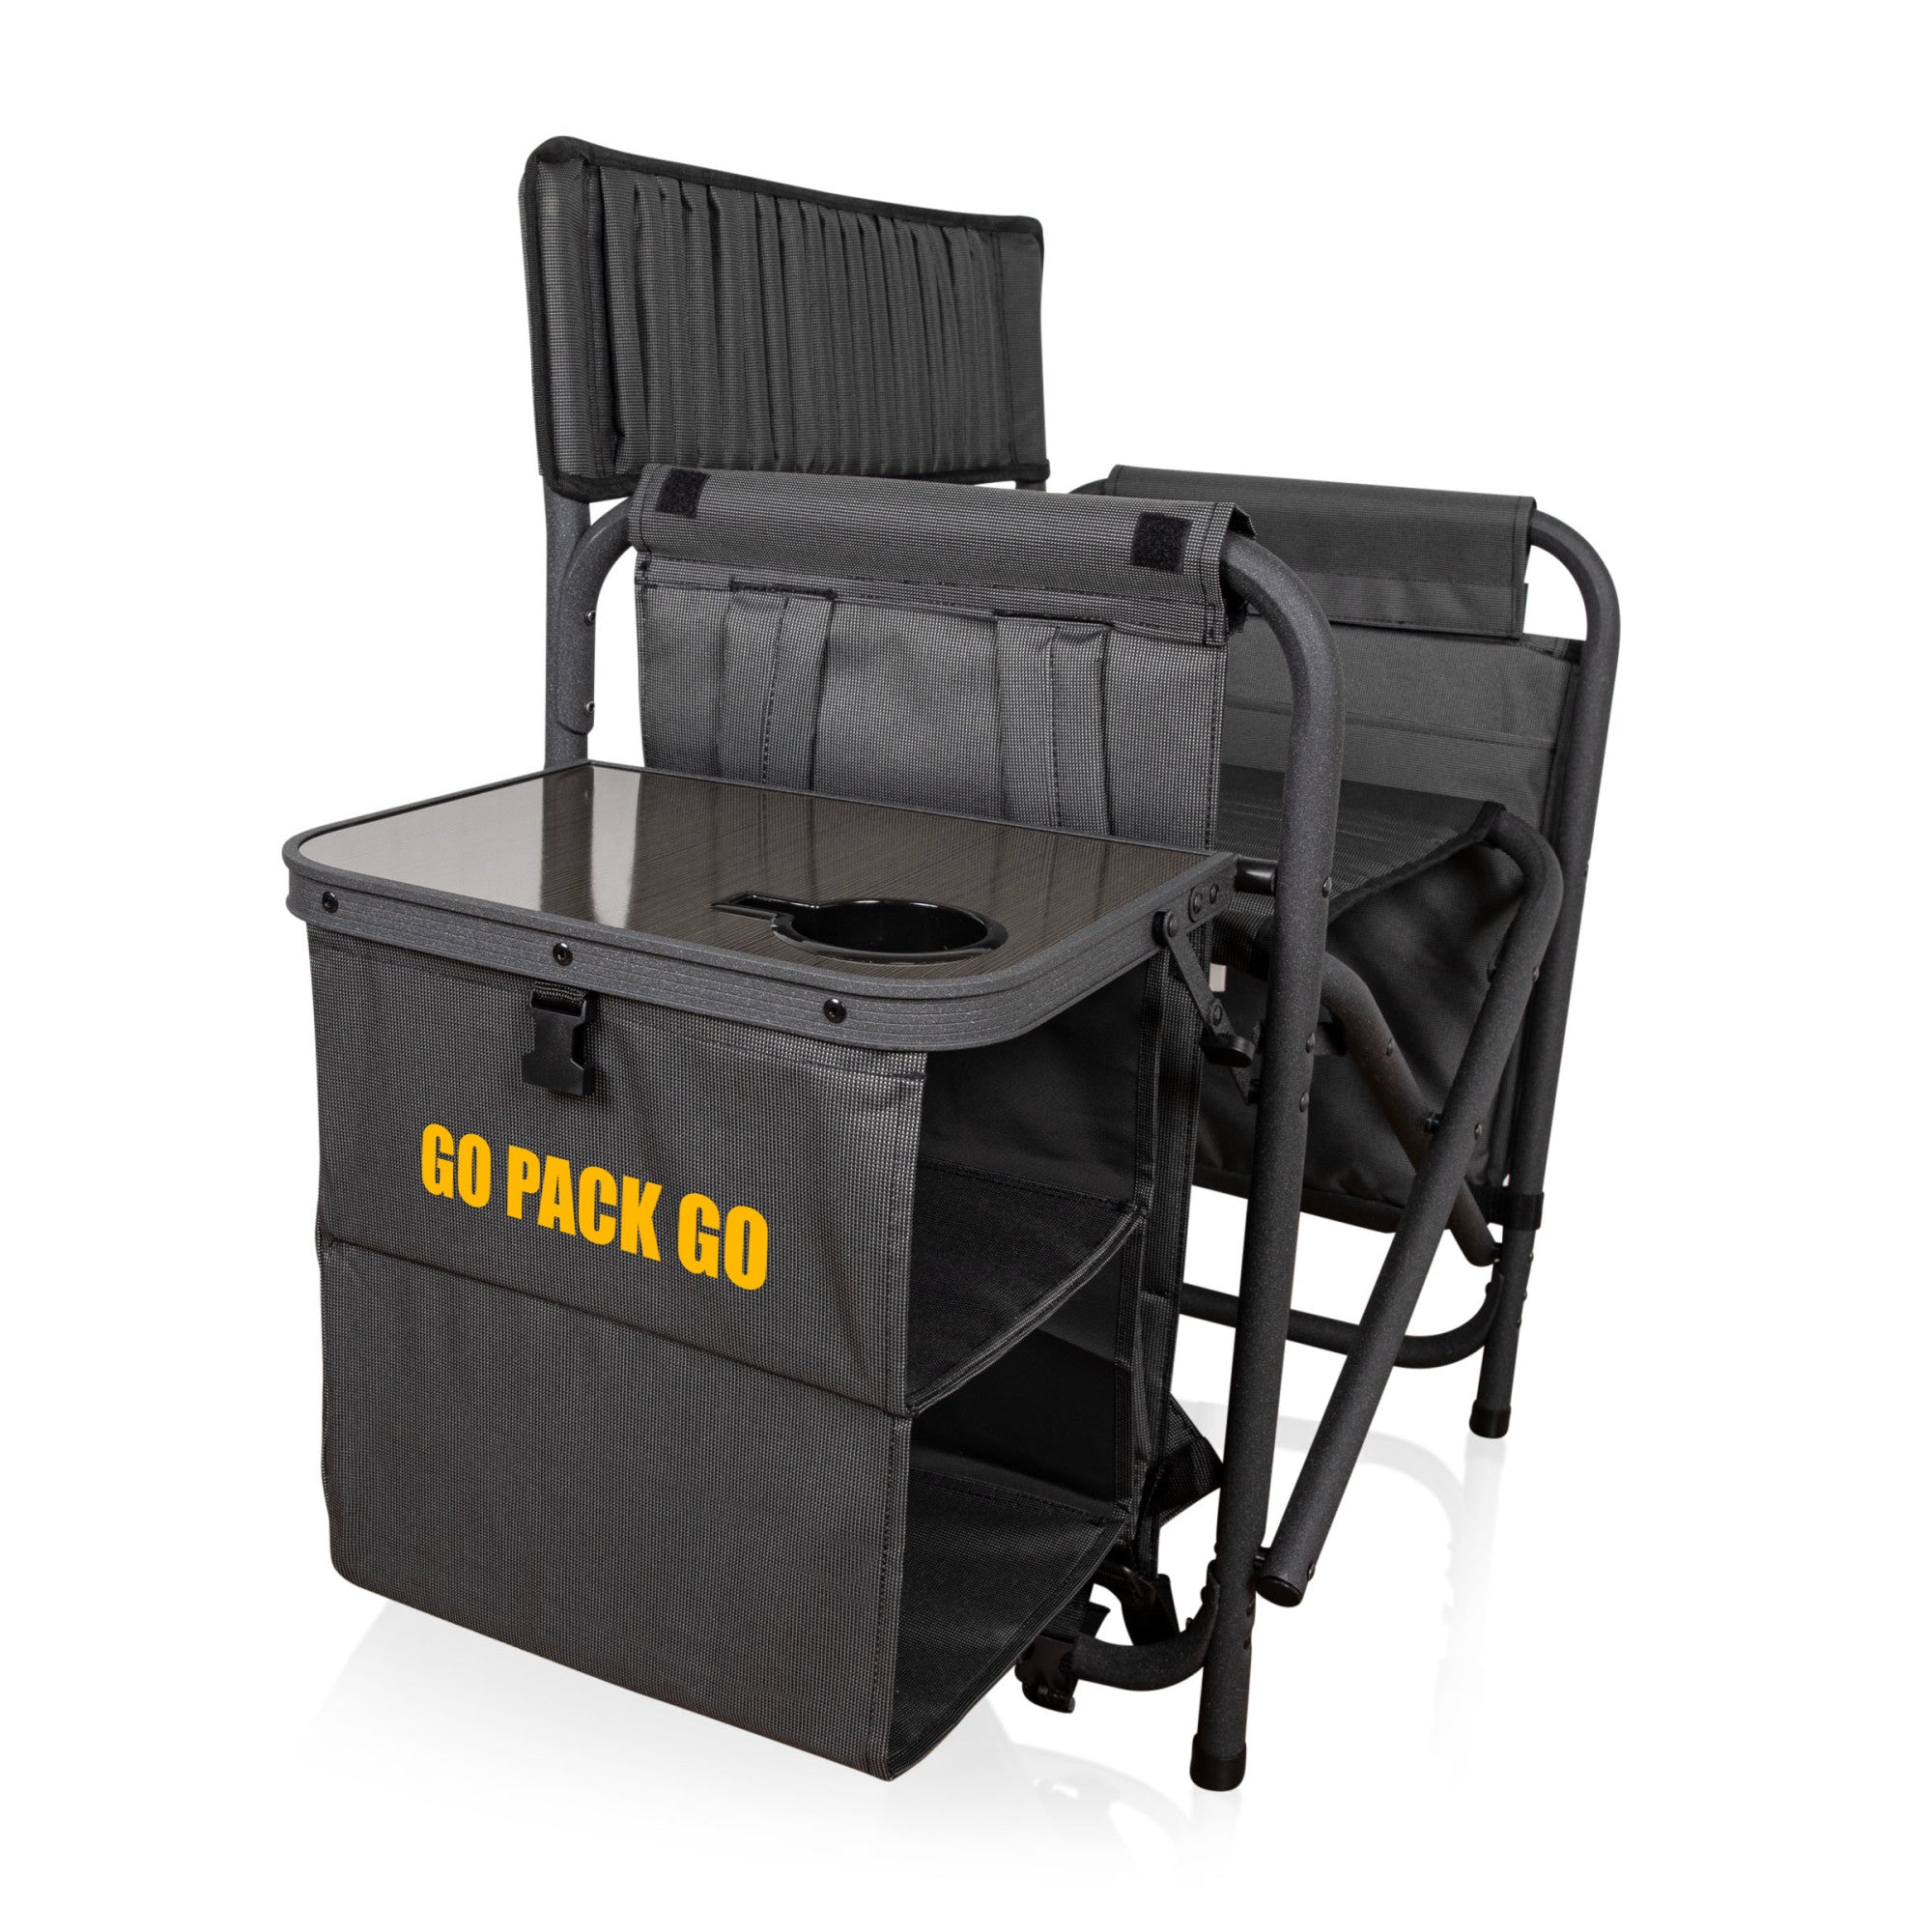 Green Bay Packers - Fusion Camping Chair